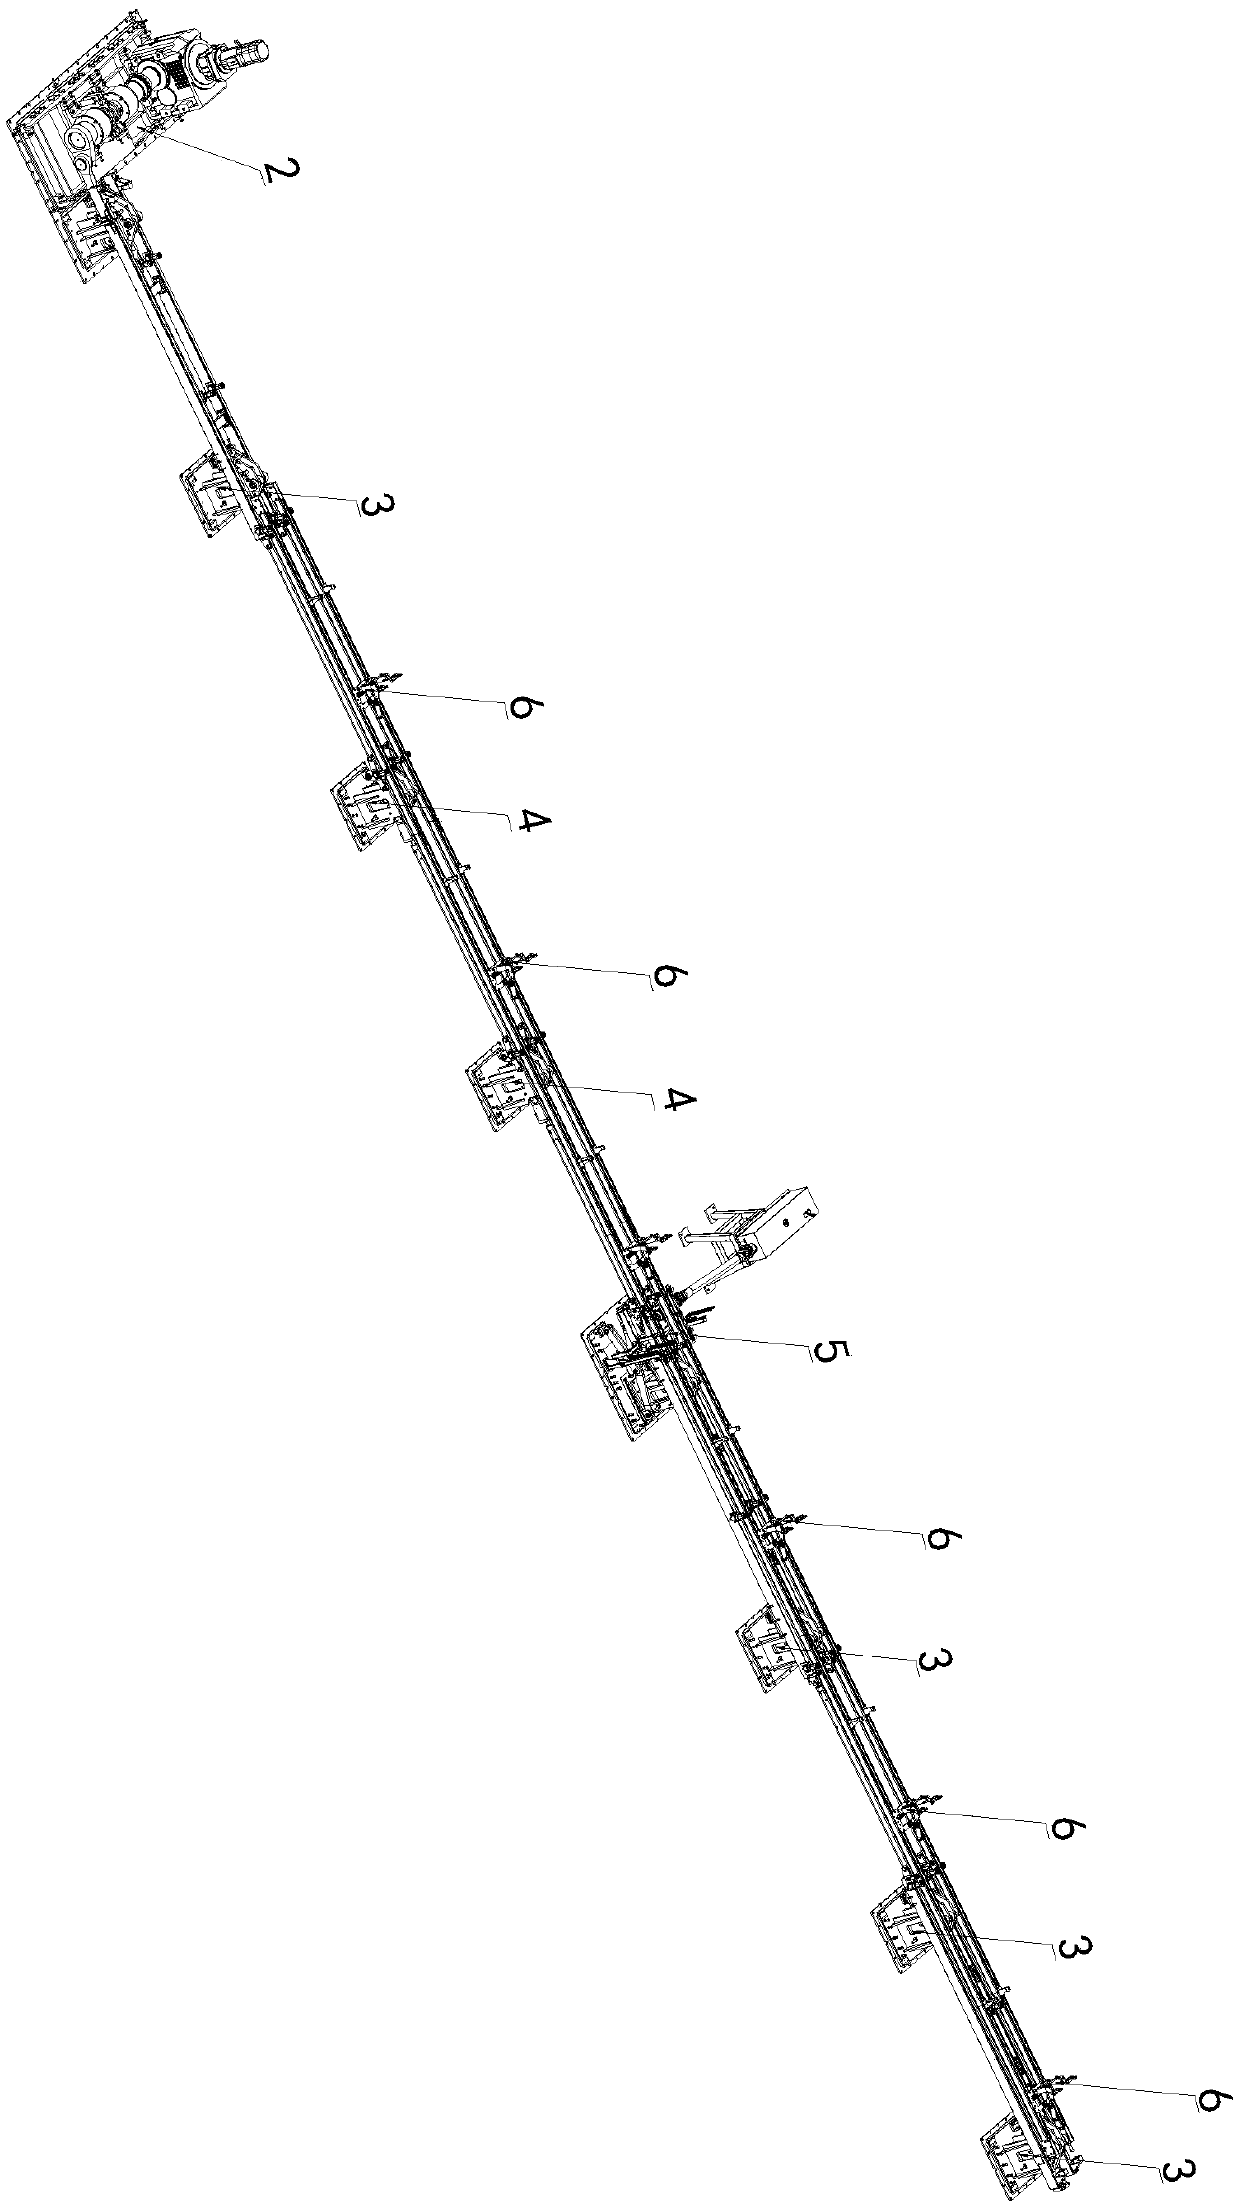 Reciprocating rod conveying system